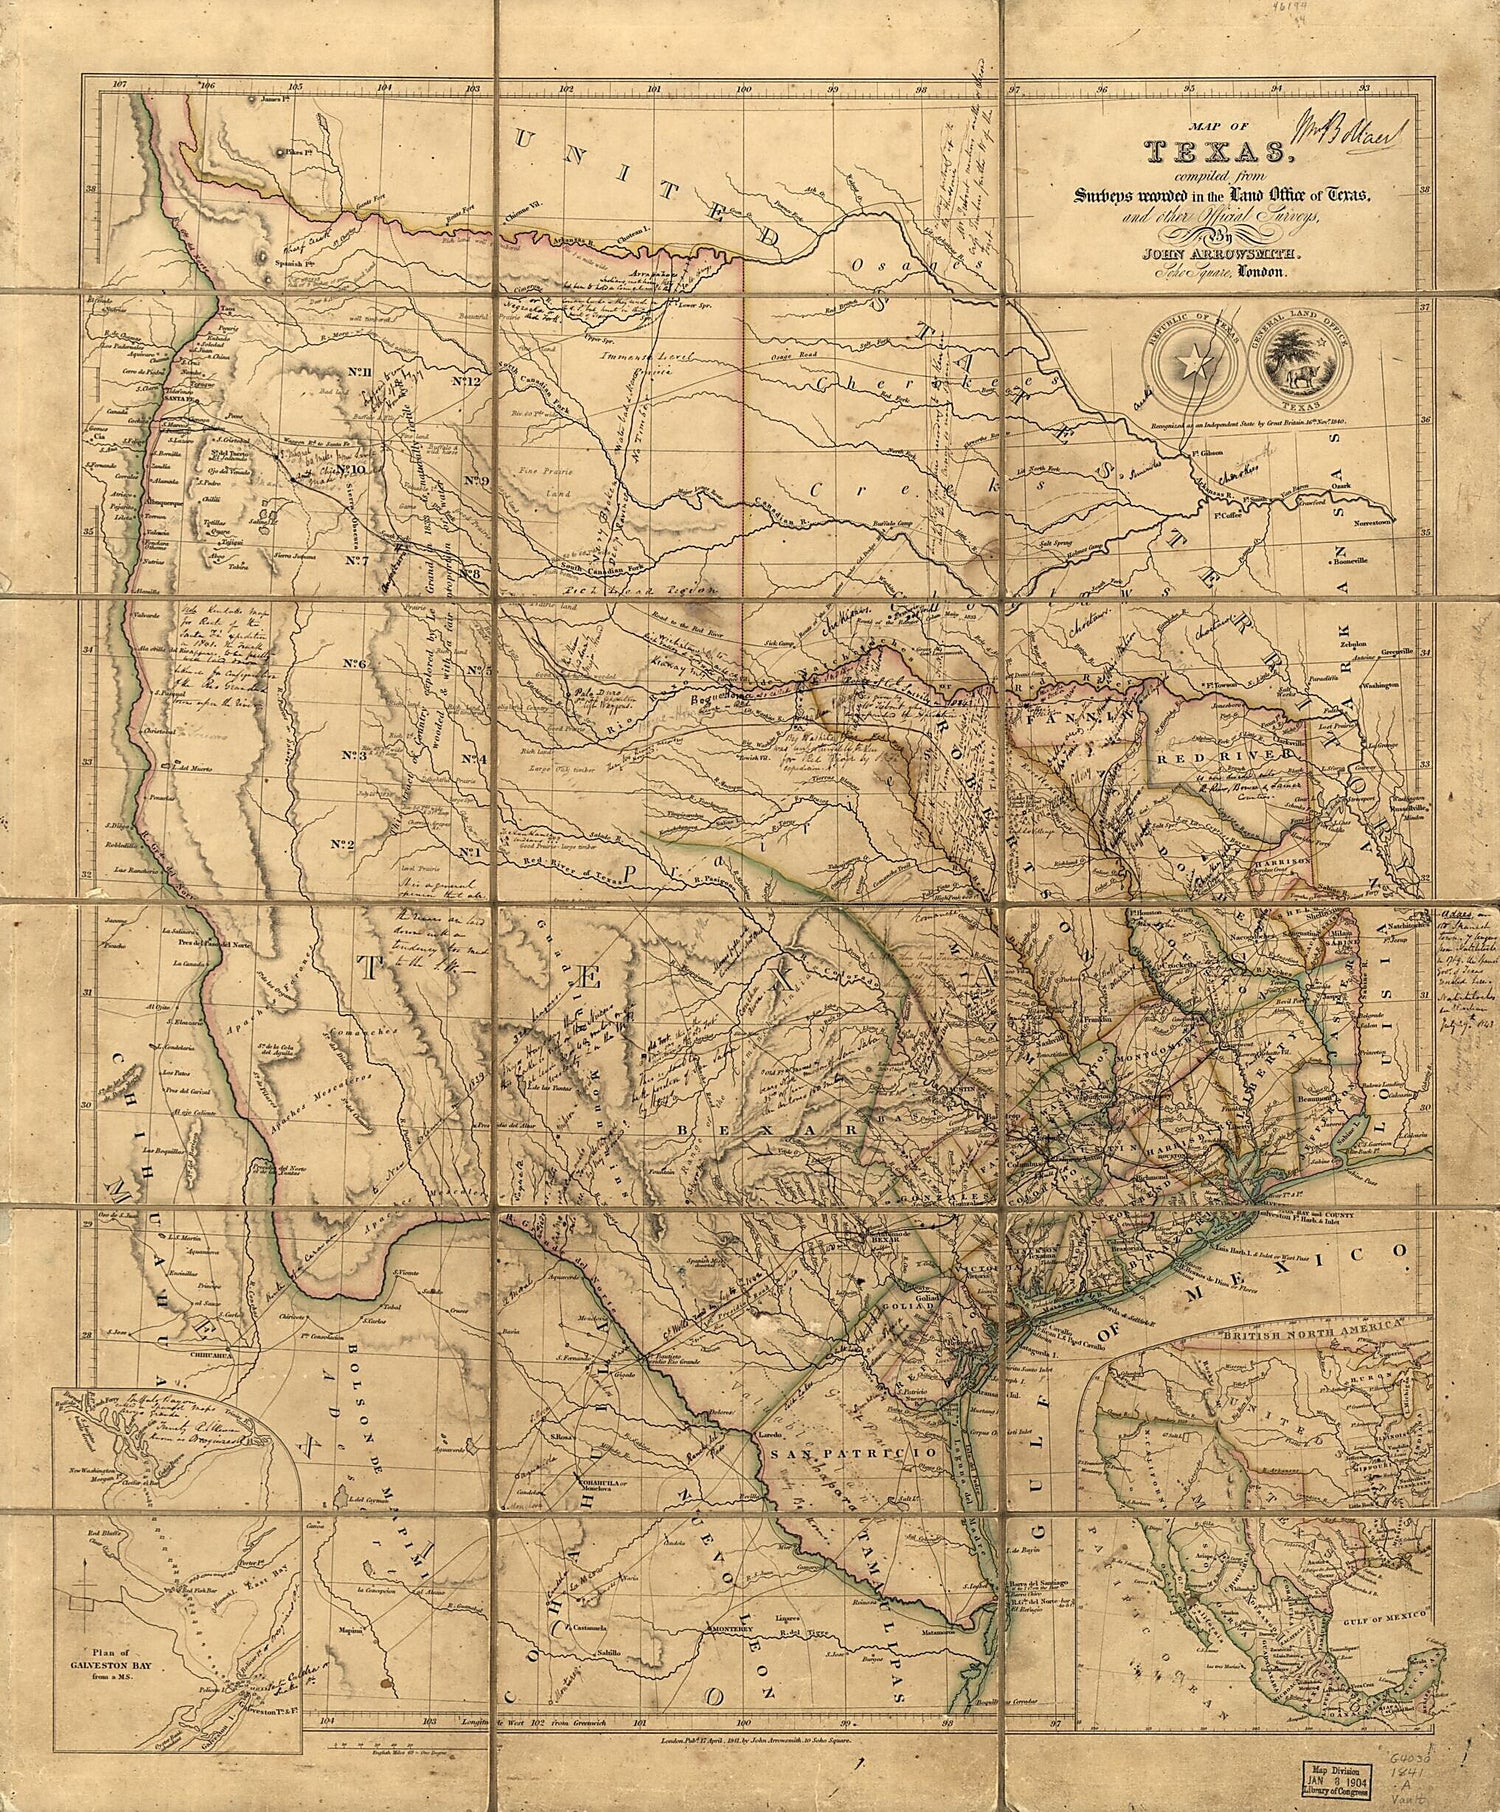 This old map of Map of Texas from 1841 was created by John Arrowsmith, William Bollaert in 1841